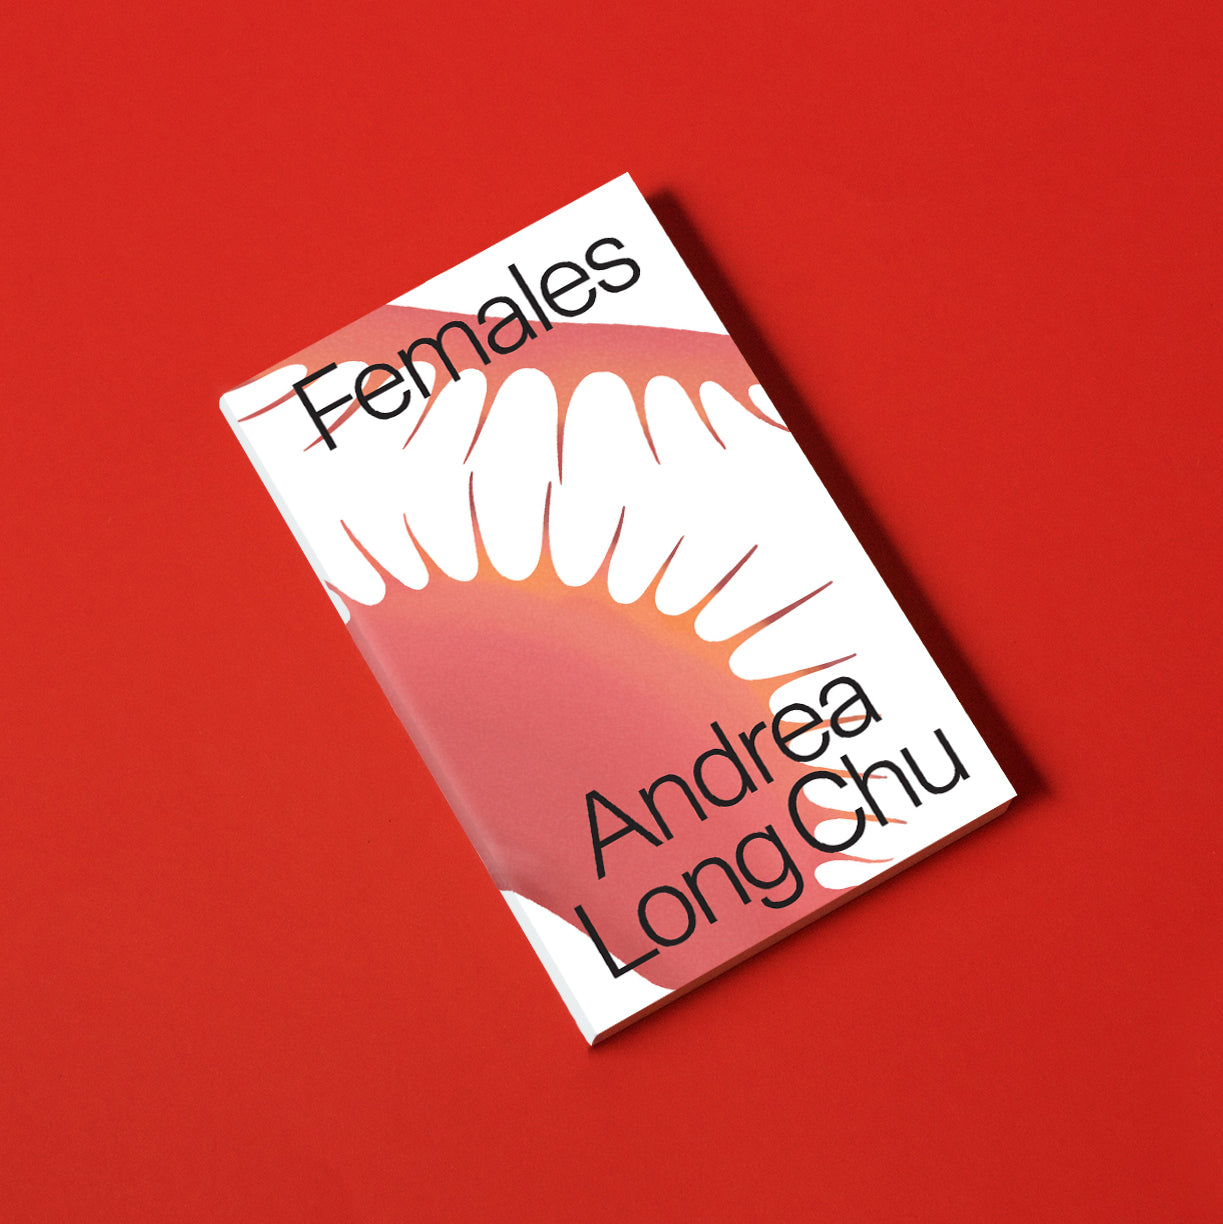 Females, by Andrea Long